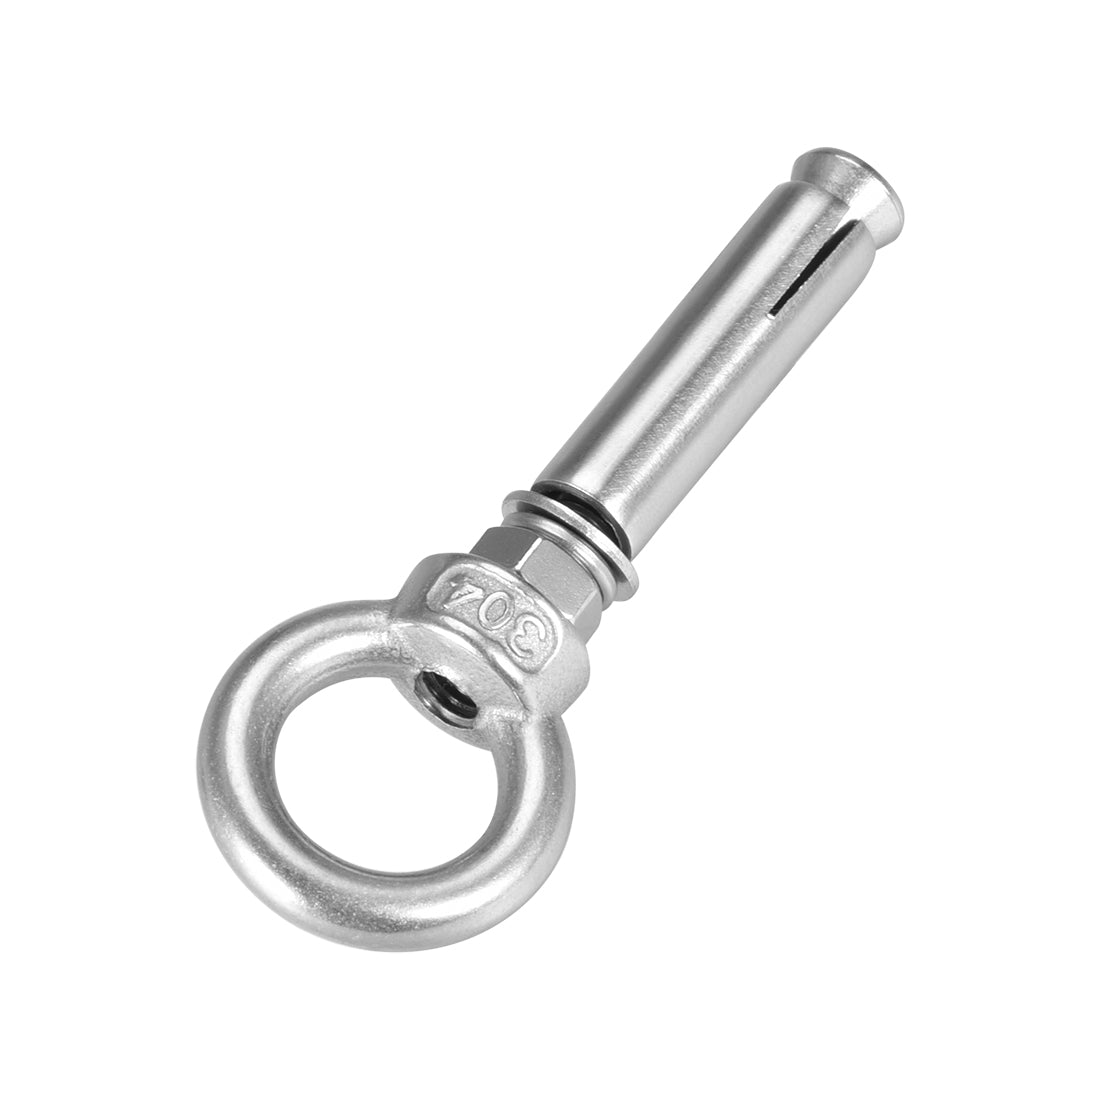 uxcell Uxcell M6 x 50 Expansion Eyebolt Eye Nut Screw with Ring Anchor Raw Bolts 1 Pcs